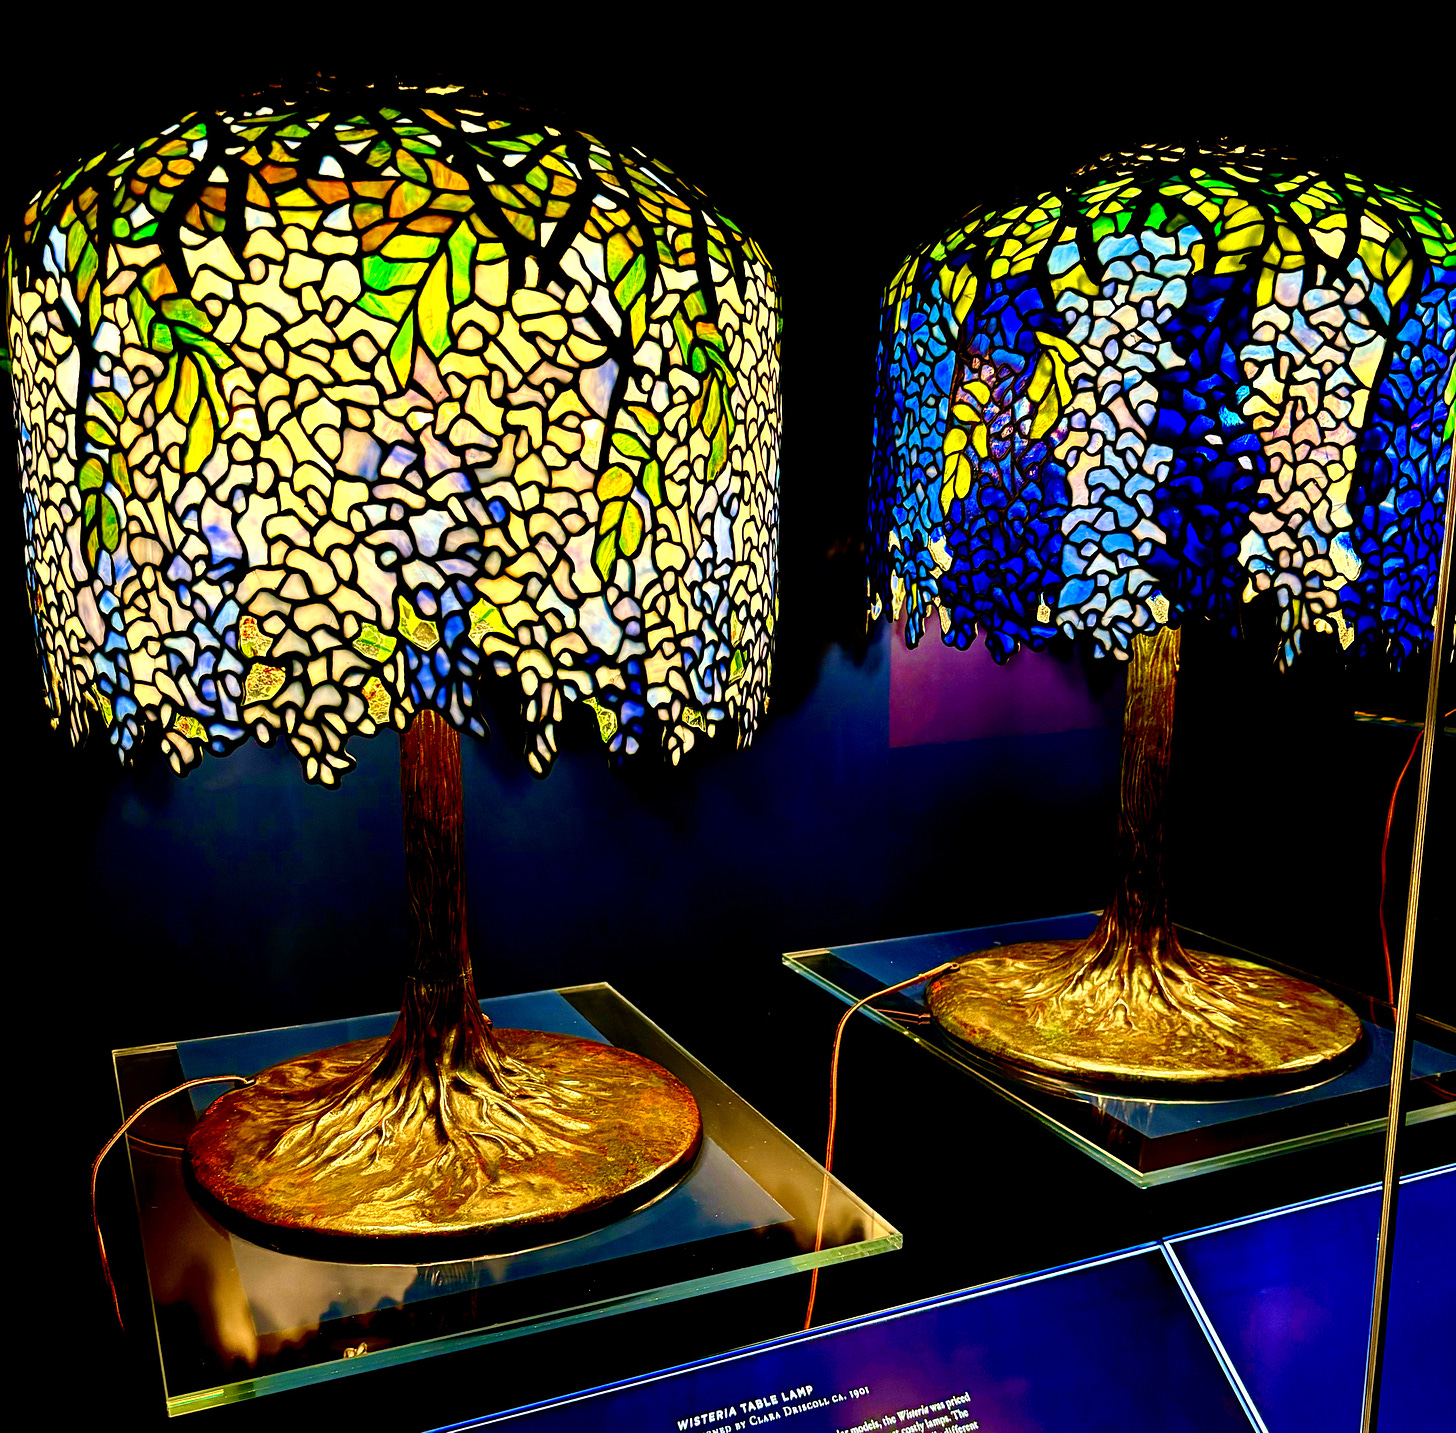 Two wisteria lamp shades and engraved bases. One is striped darker and lighter blue. The one on the left is more blue interspersed with green glass.